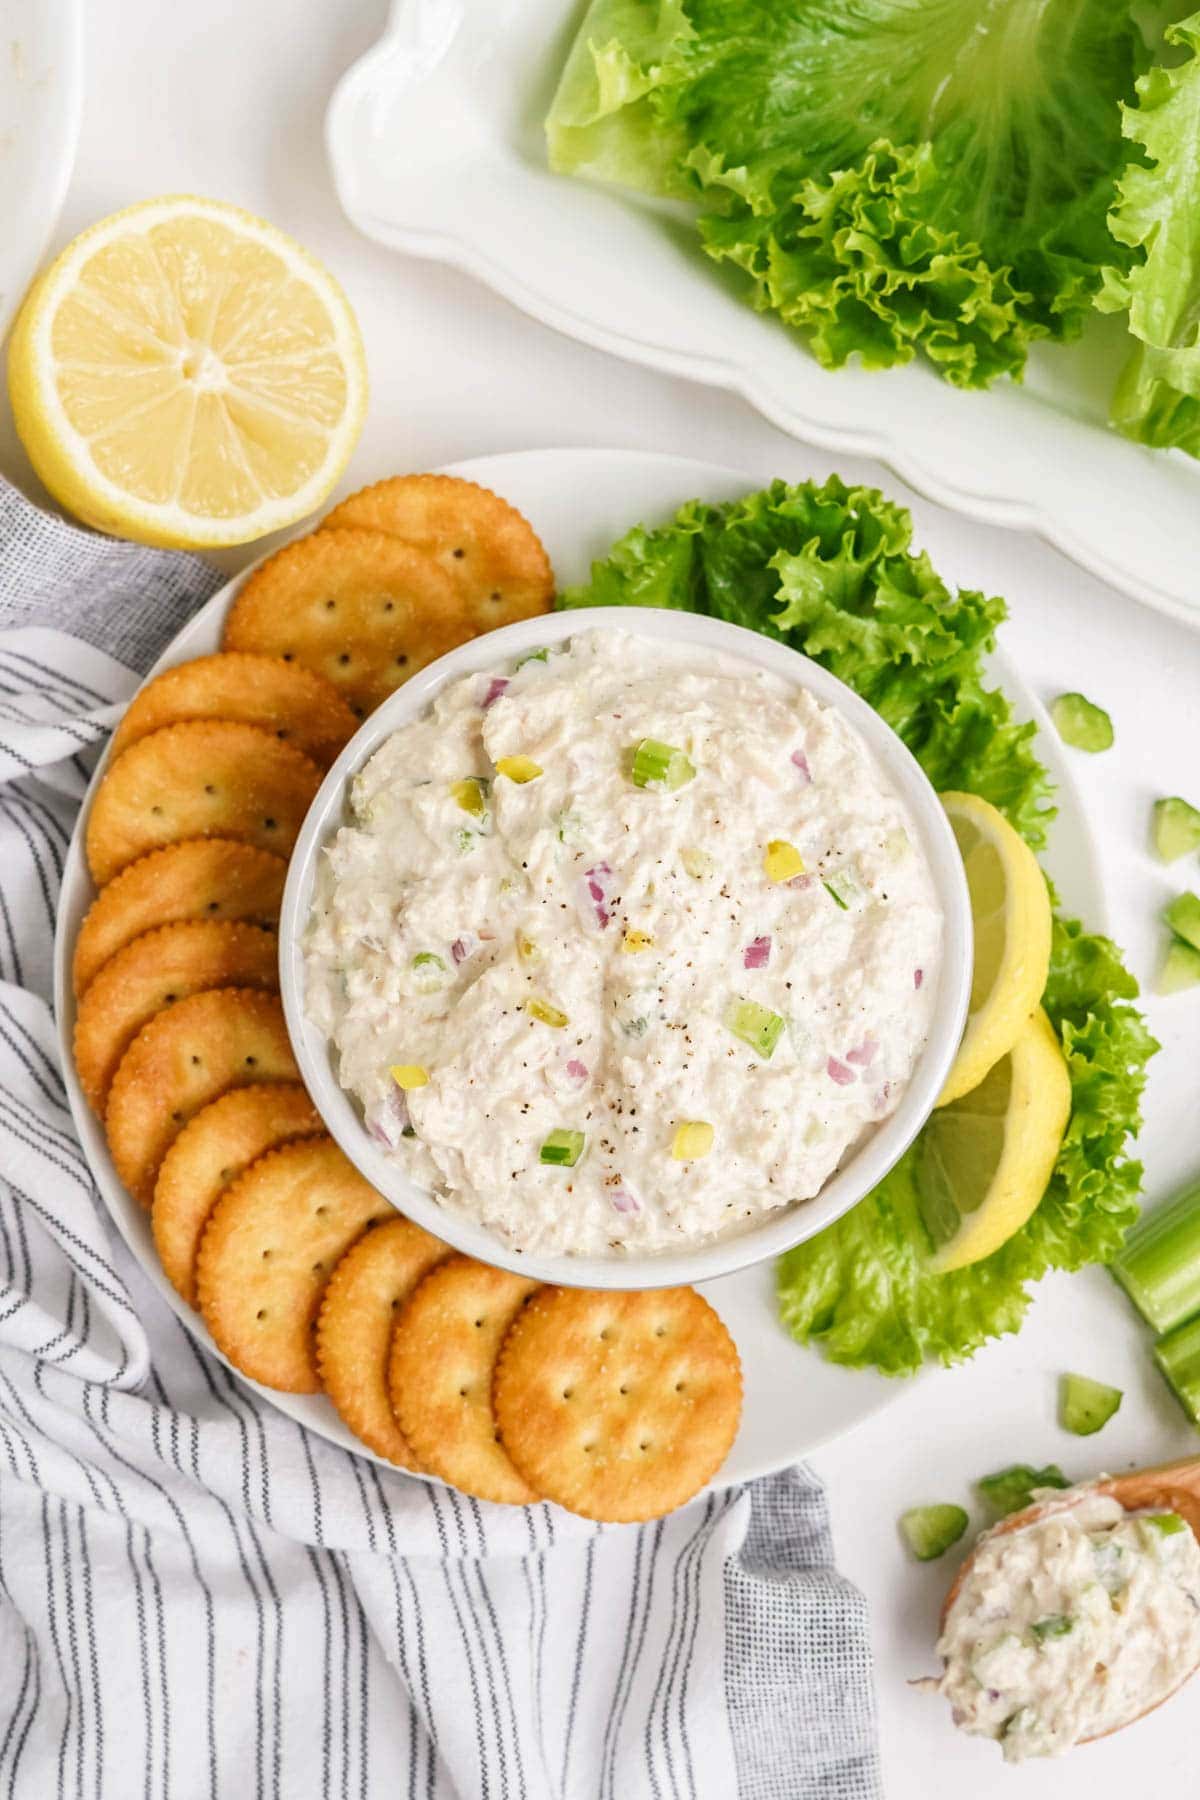 tuna salad in a white dish surrounded by crackers, parsley and lemon